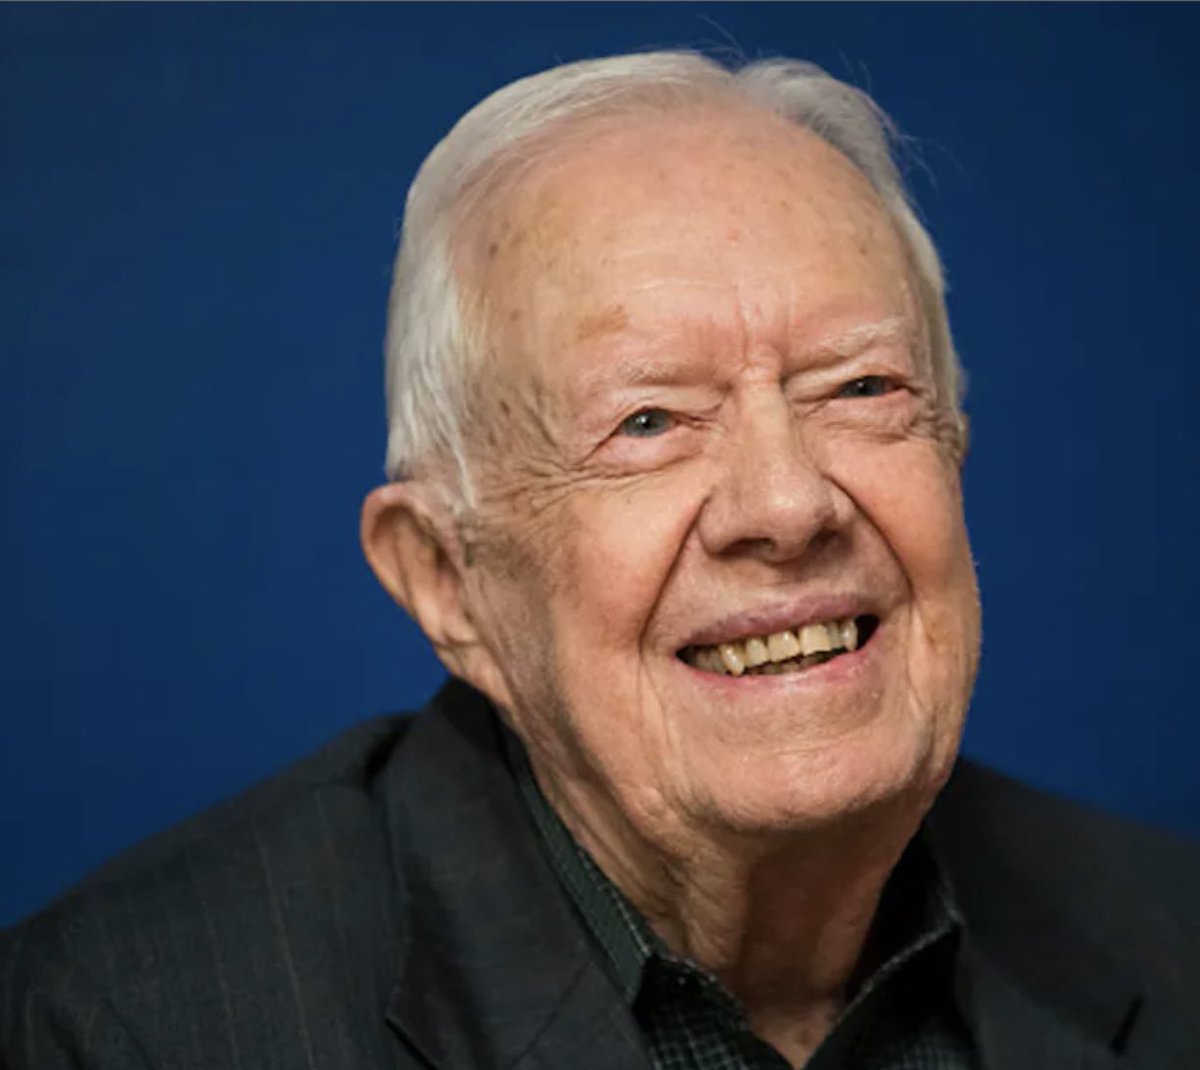 BREAKING: The Grandson of Jimmy Carter, says the former president is “coming to the end.” “My grandmother’s passing was a difficult moment for all of us, including my grandfather,” Jason Carter said. But he recounted one conversation with his grandfather during an Atlanta